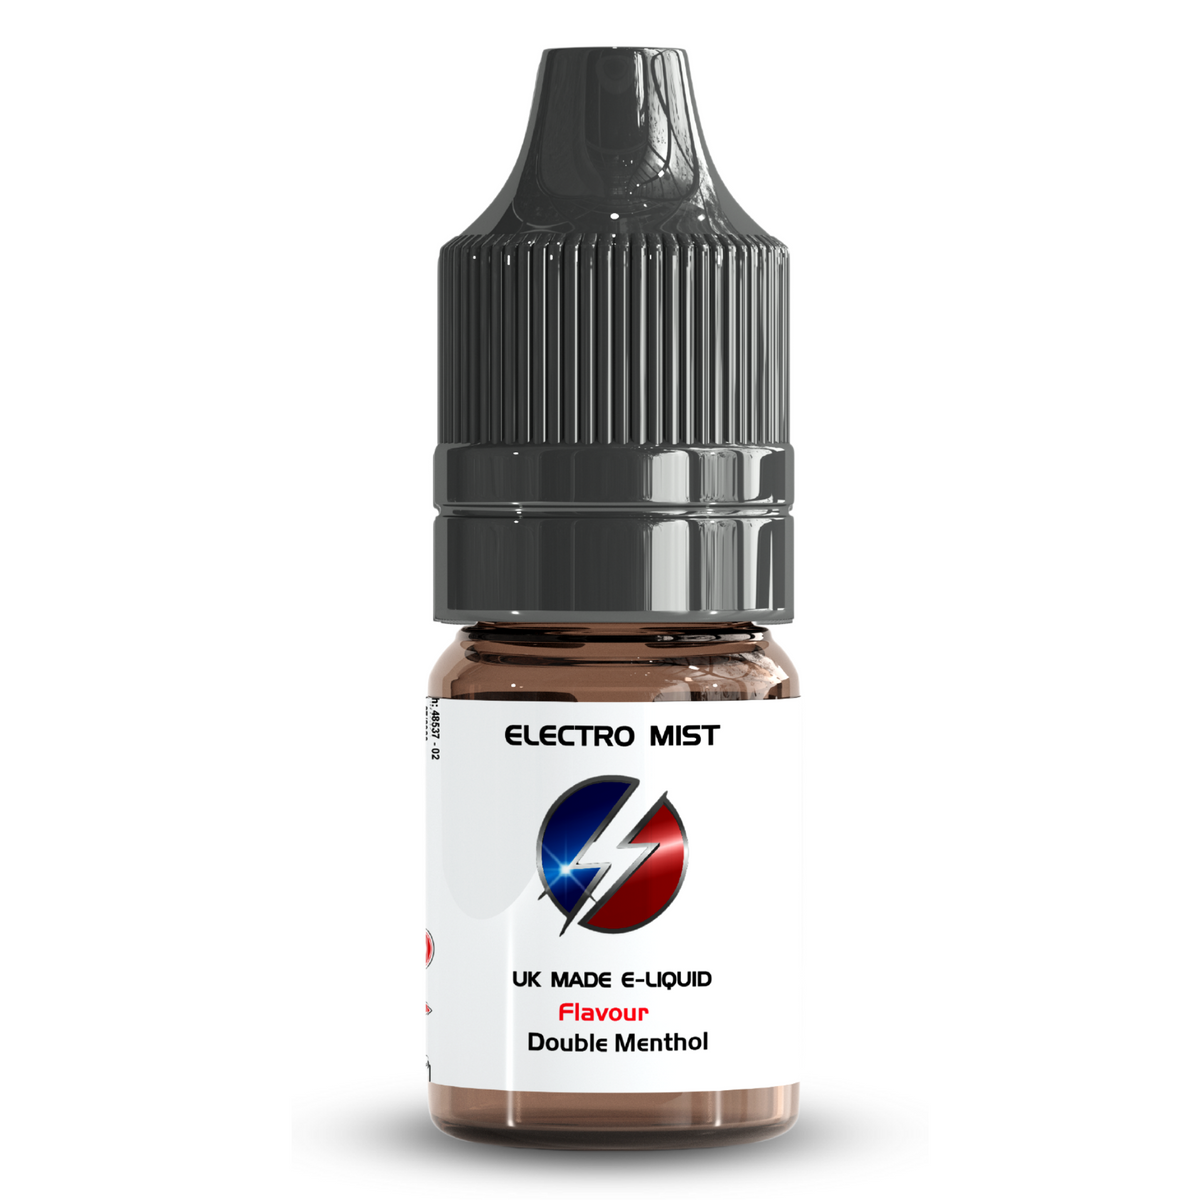 Electromist, the e-liquid brand you can trust. Get your taste buds ready for a flavour sensation, Double Menthol. Nicotine Content: 3mg/6mg/12mg. Products may contain nicotine. For over 18s Only ejuice, vape pen, eliquid, e cigarette, 10ml, vaping, cloud, PG, VG, 60/40, vape liquid, Flavour